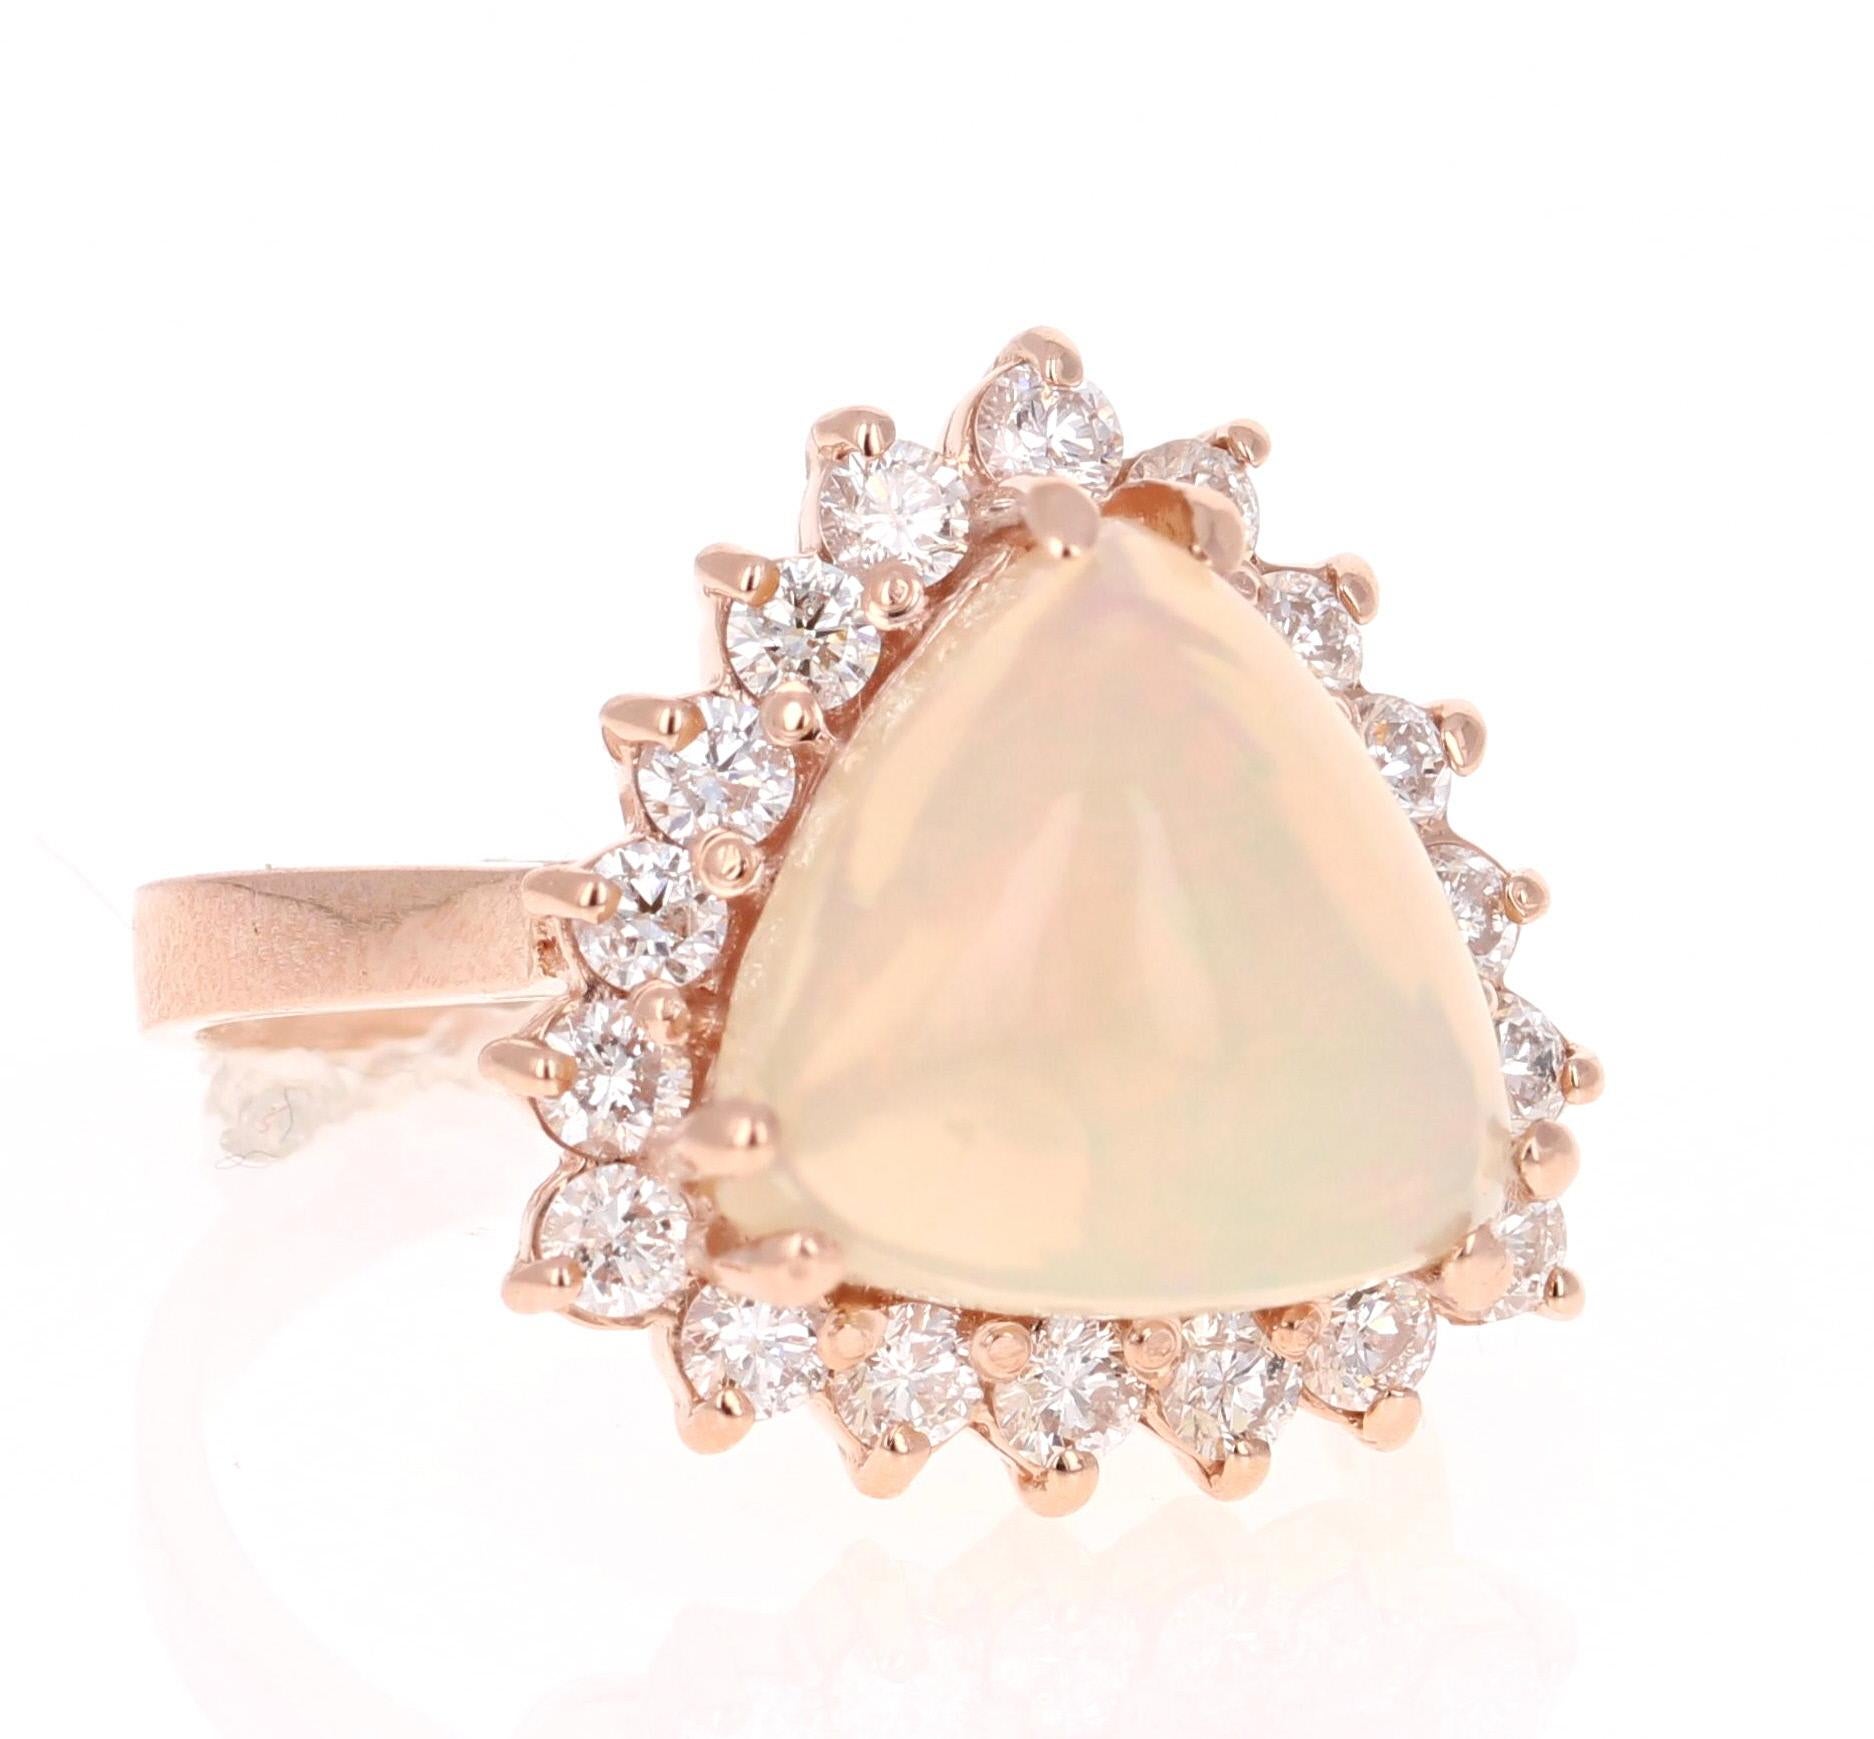 4.56 Carat Oval Cut Opal Diamond Rose Gold Engagement Ring!

Opulent Ethiopian Opal and Diamond Ring made in a 14K Rose Gold setting.  The Triangle Cut Opal in this Ring weighs 3.73 carats and is surrounded by 18 Round Cut Diamonds that weigh 0.83